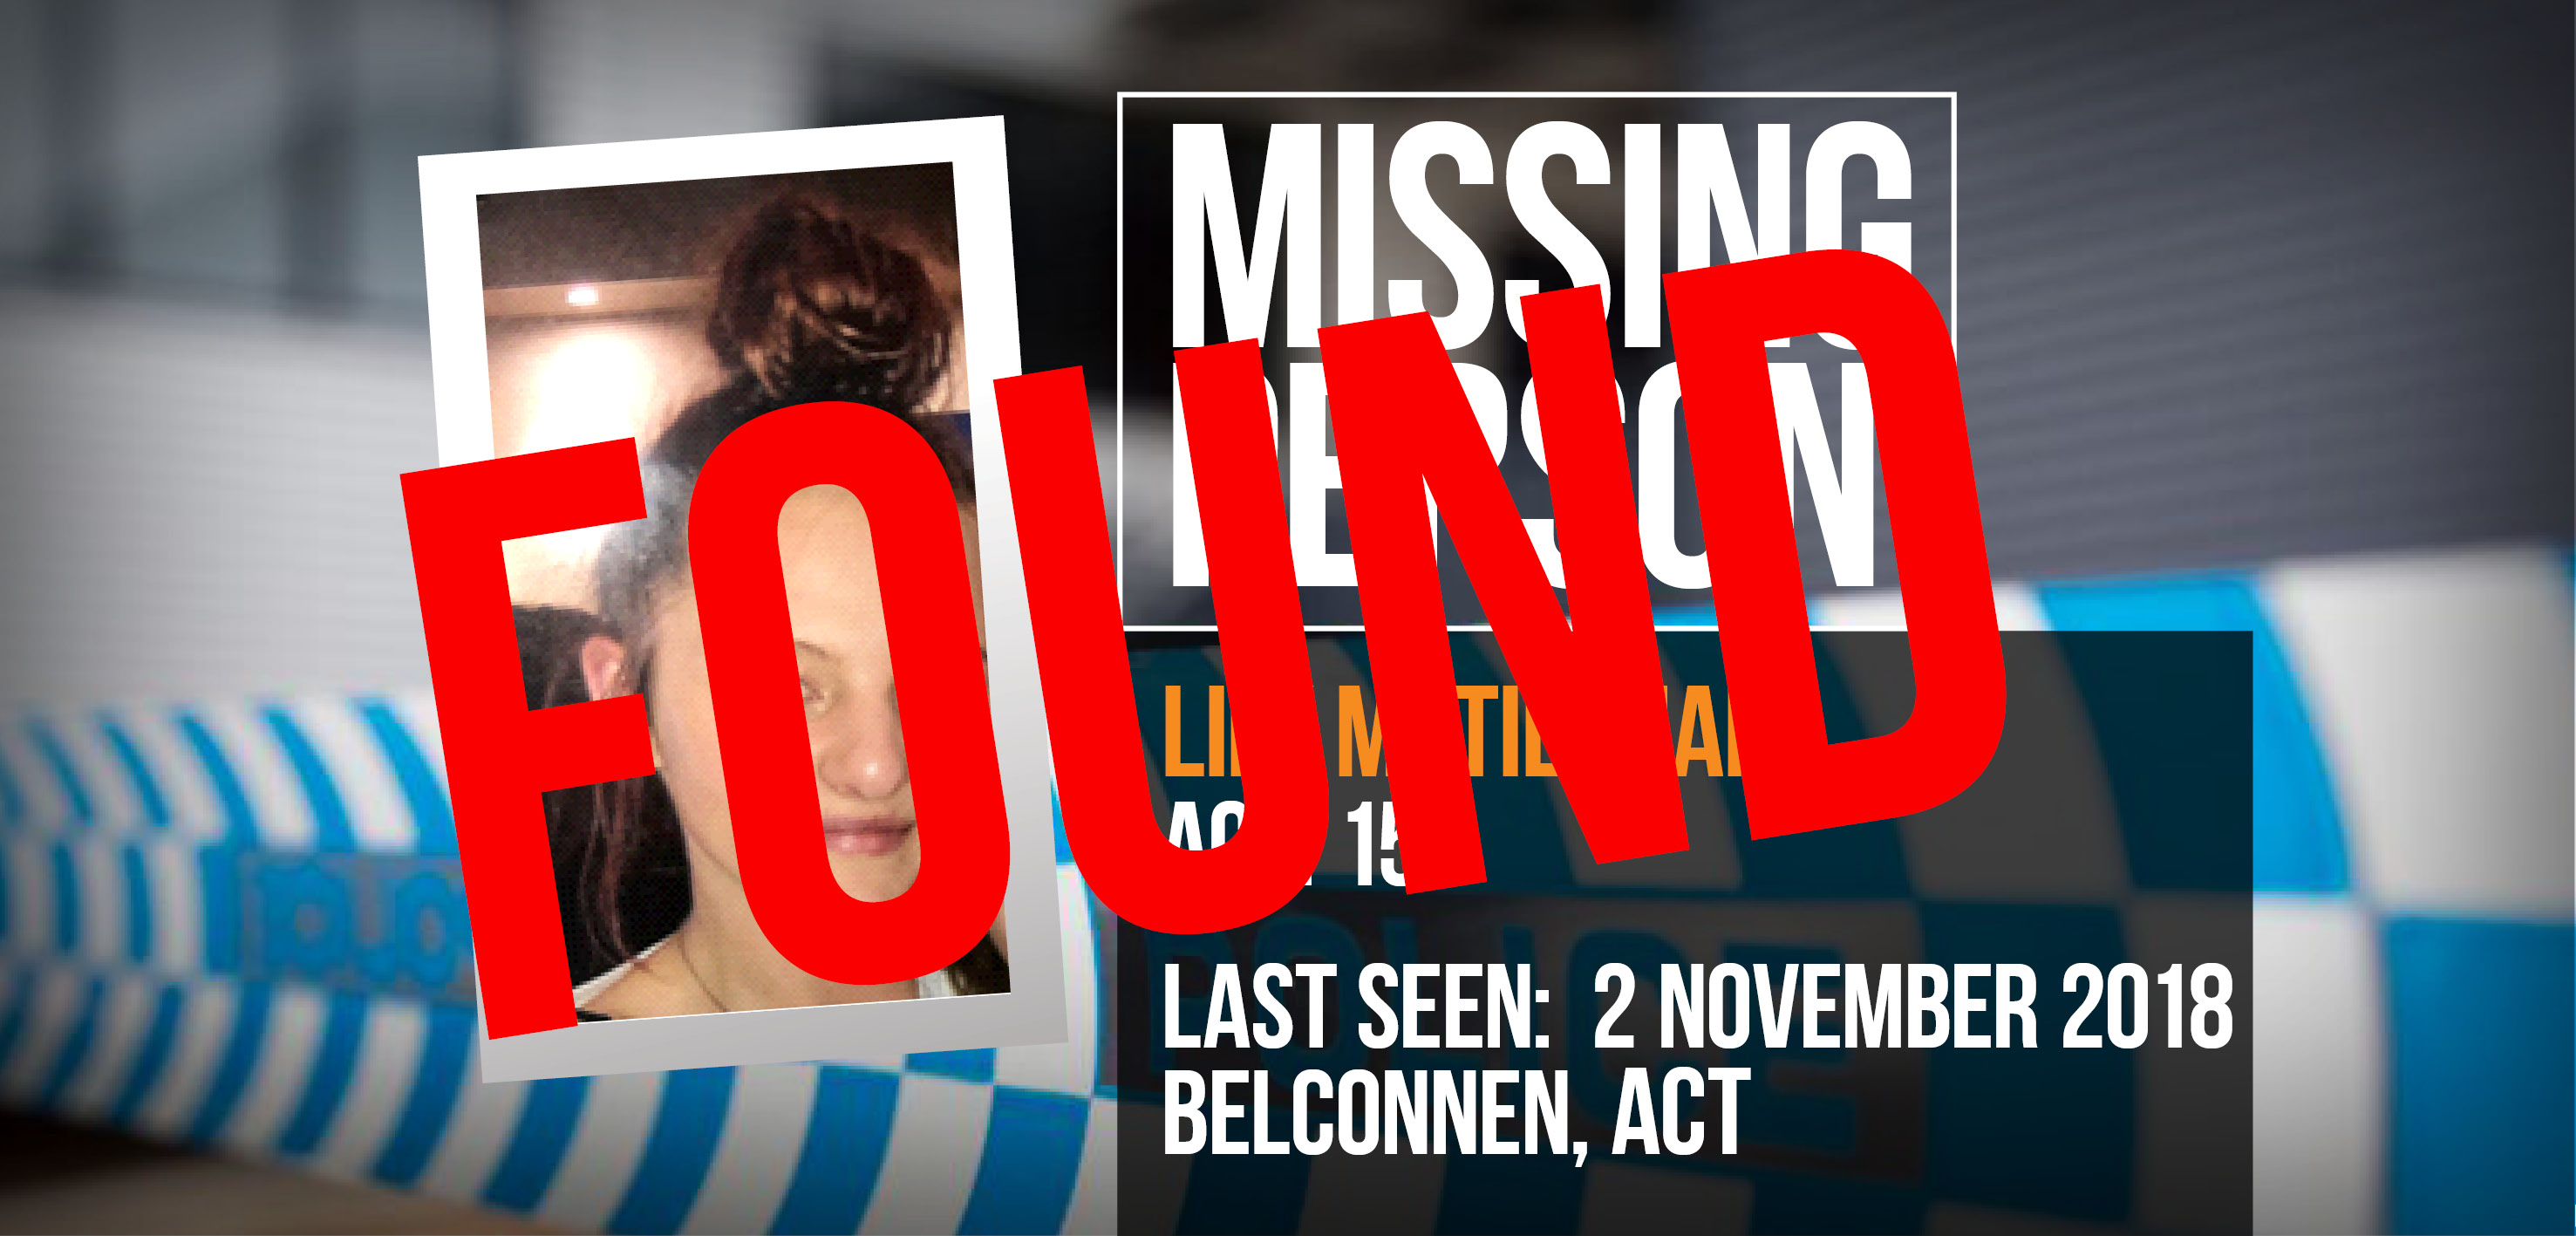 Lily McTiernan has been located. Thank you Canberra for your assistance.